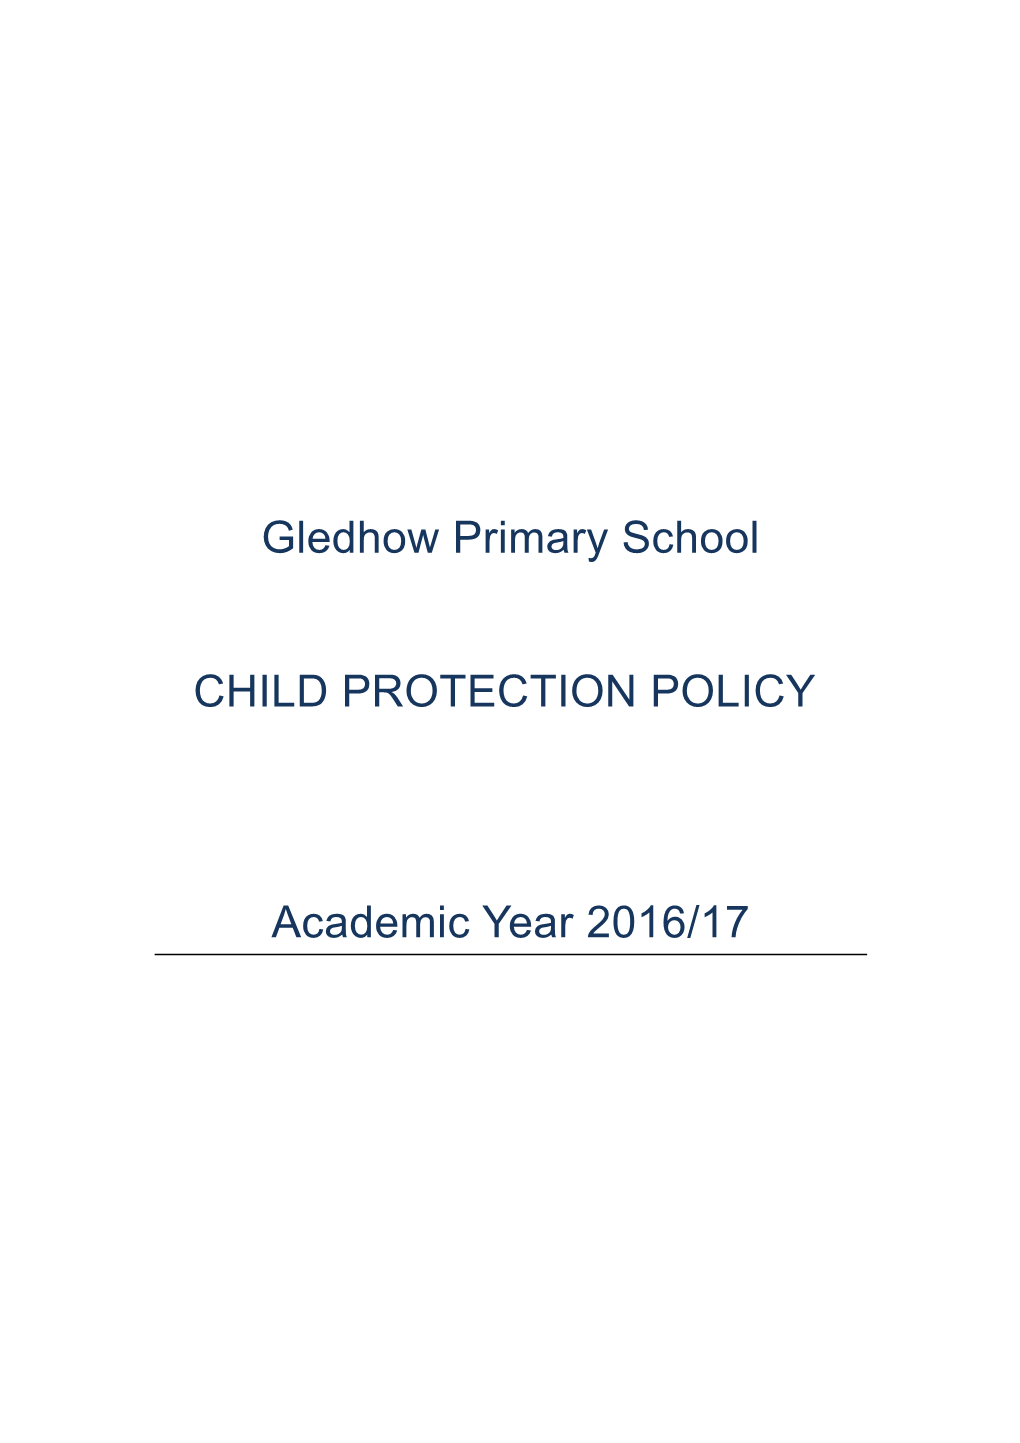 Education Policies & Good Practice Guidelines 3